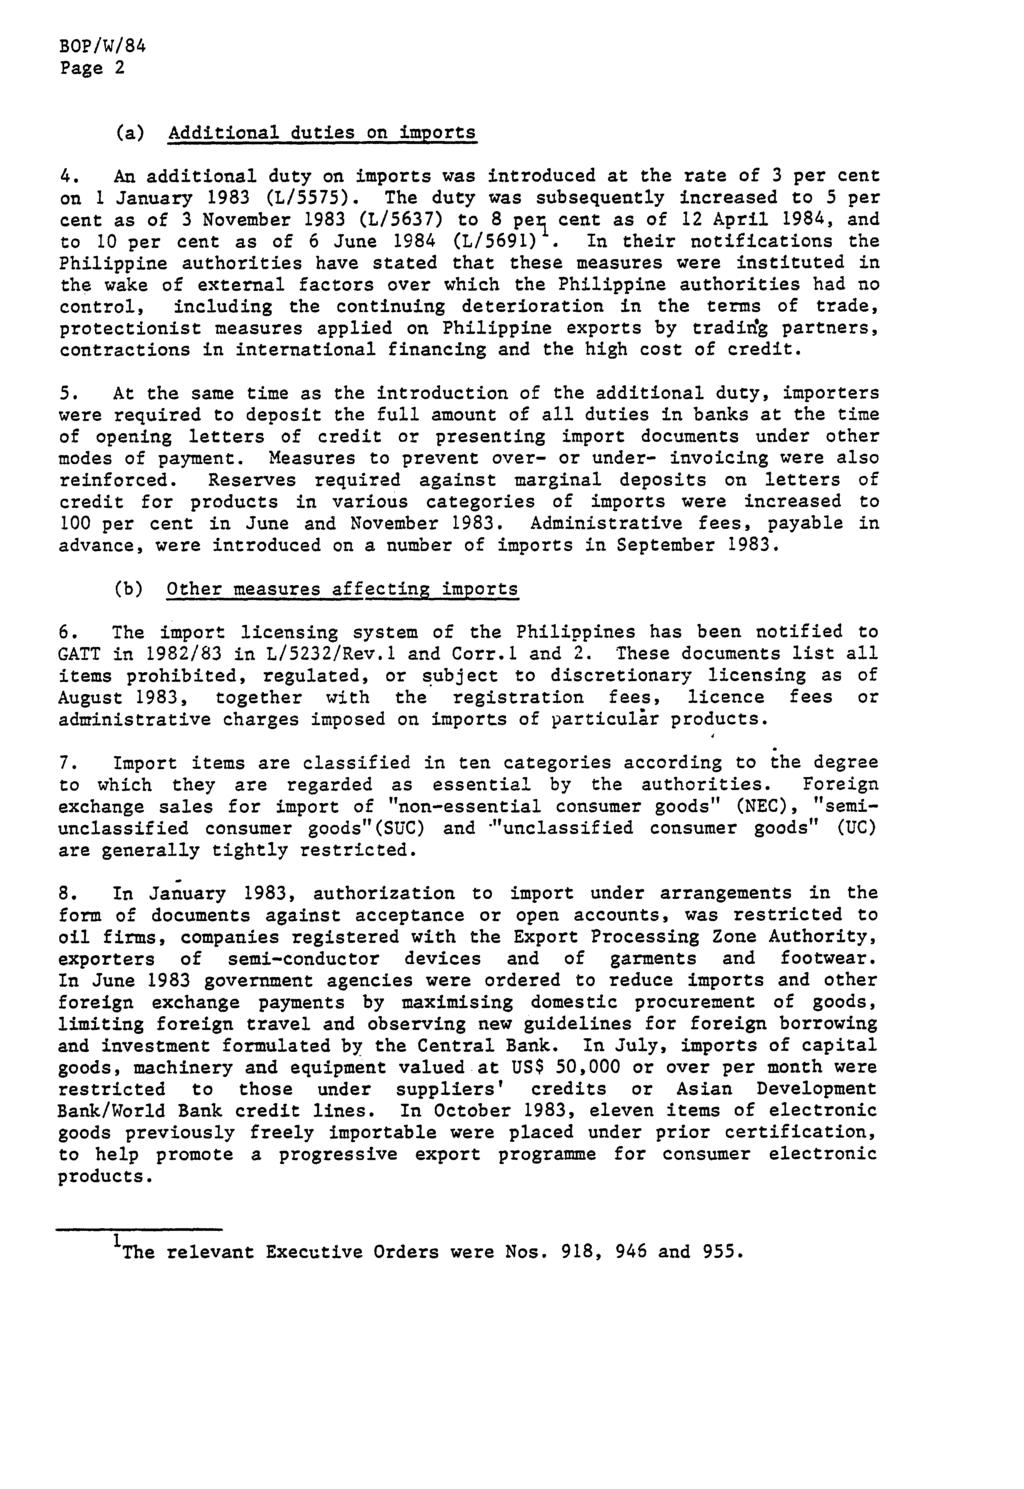 Page 2 (a) Additional duties on imports 4. An additional duty on imports was introduced at the rate of 3 per cent on 1 January 1983 (L/5575).